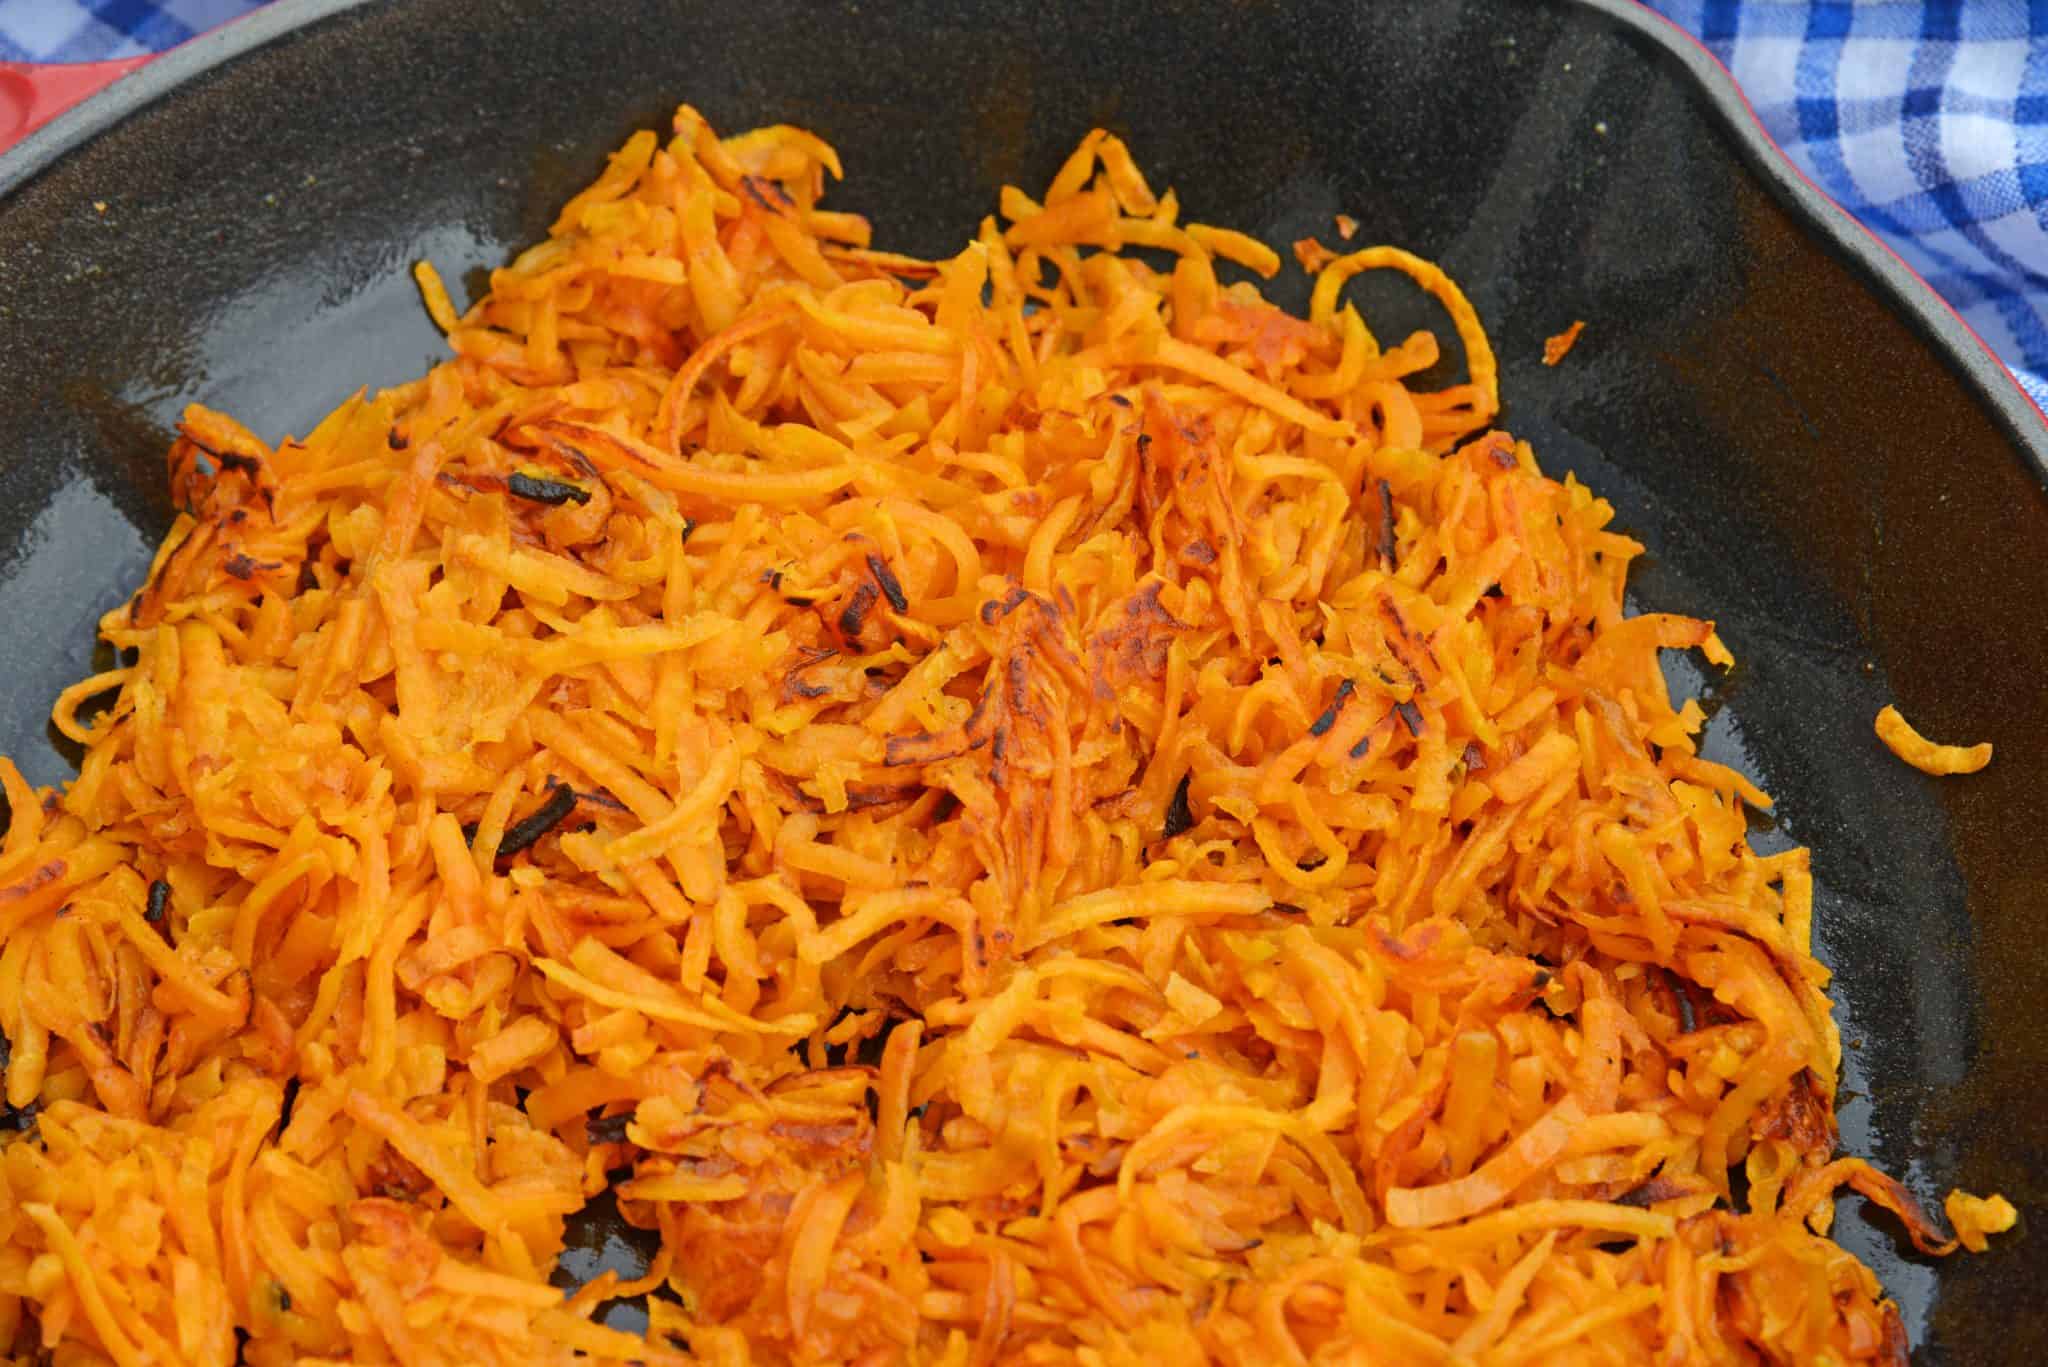 Sweet Potato Hash Browns - Easy Recipe with Shredded Sweet Potatoes